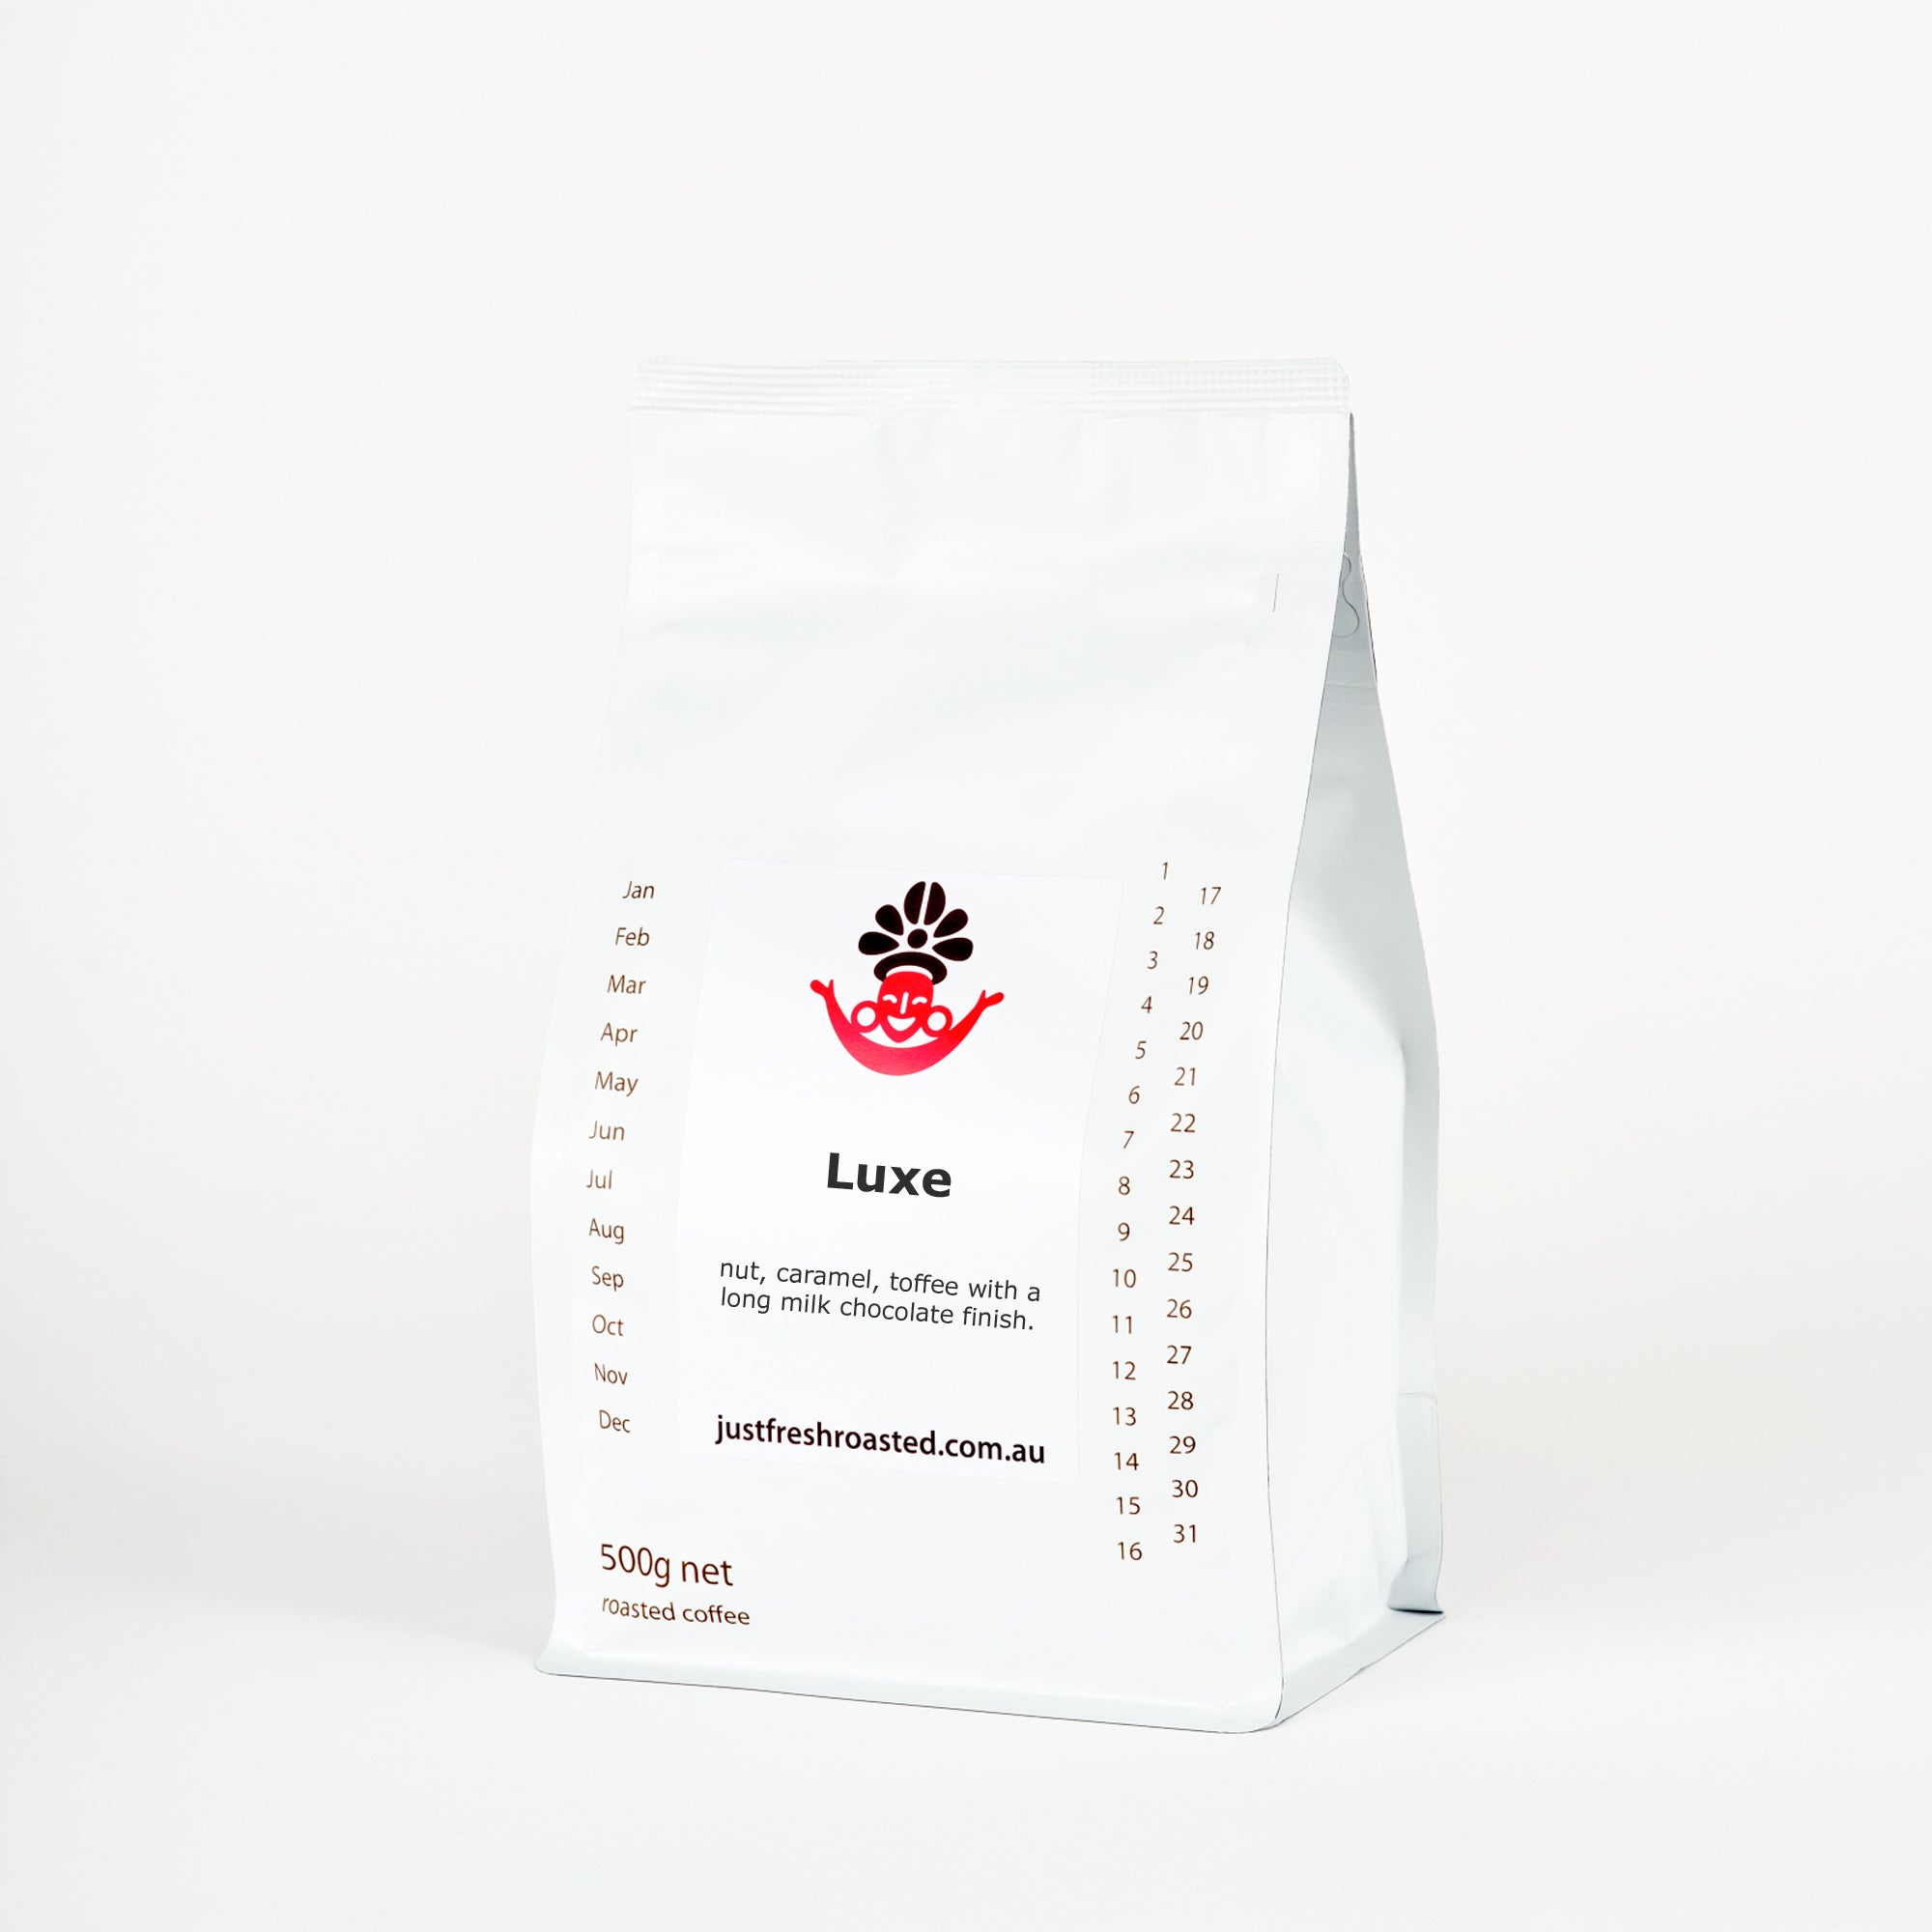 500g Luxe blend fresh roasted coffee